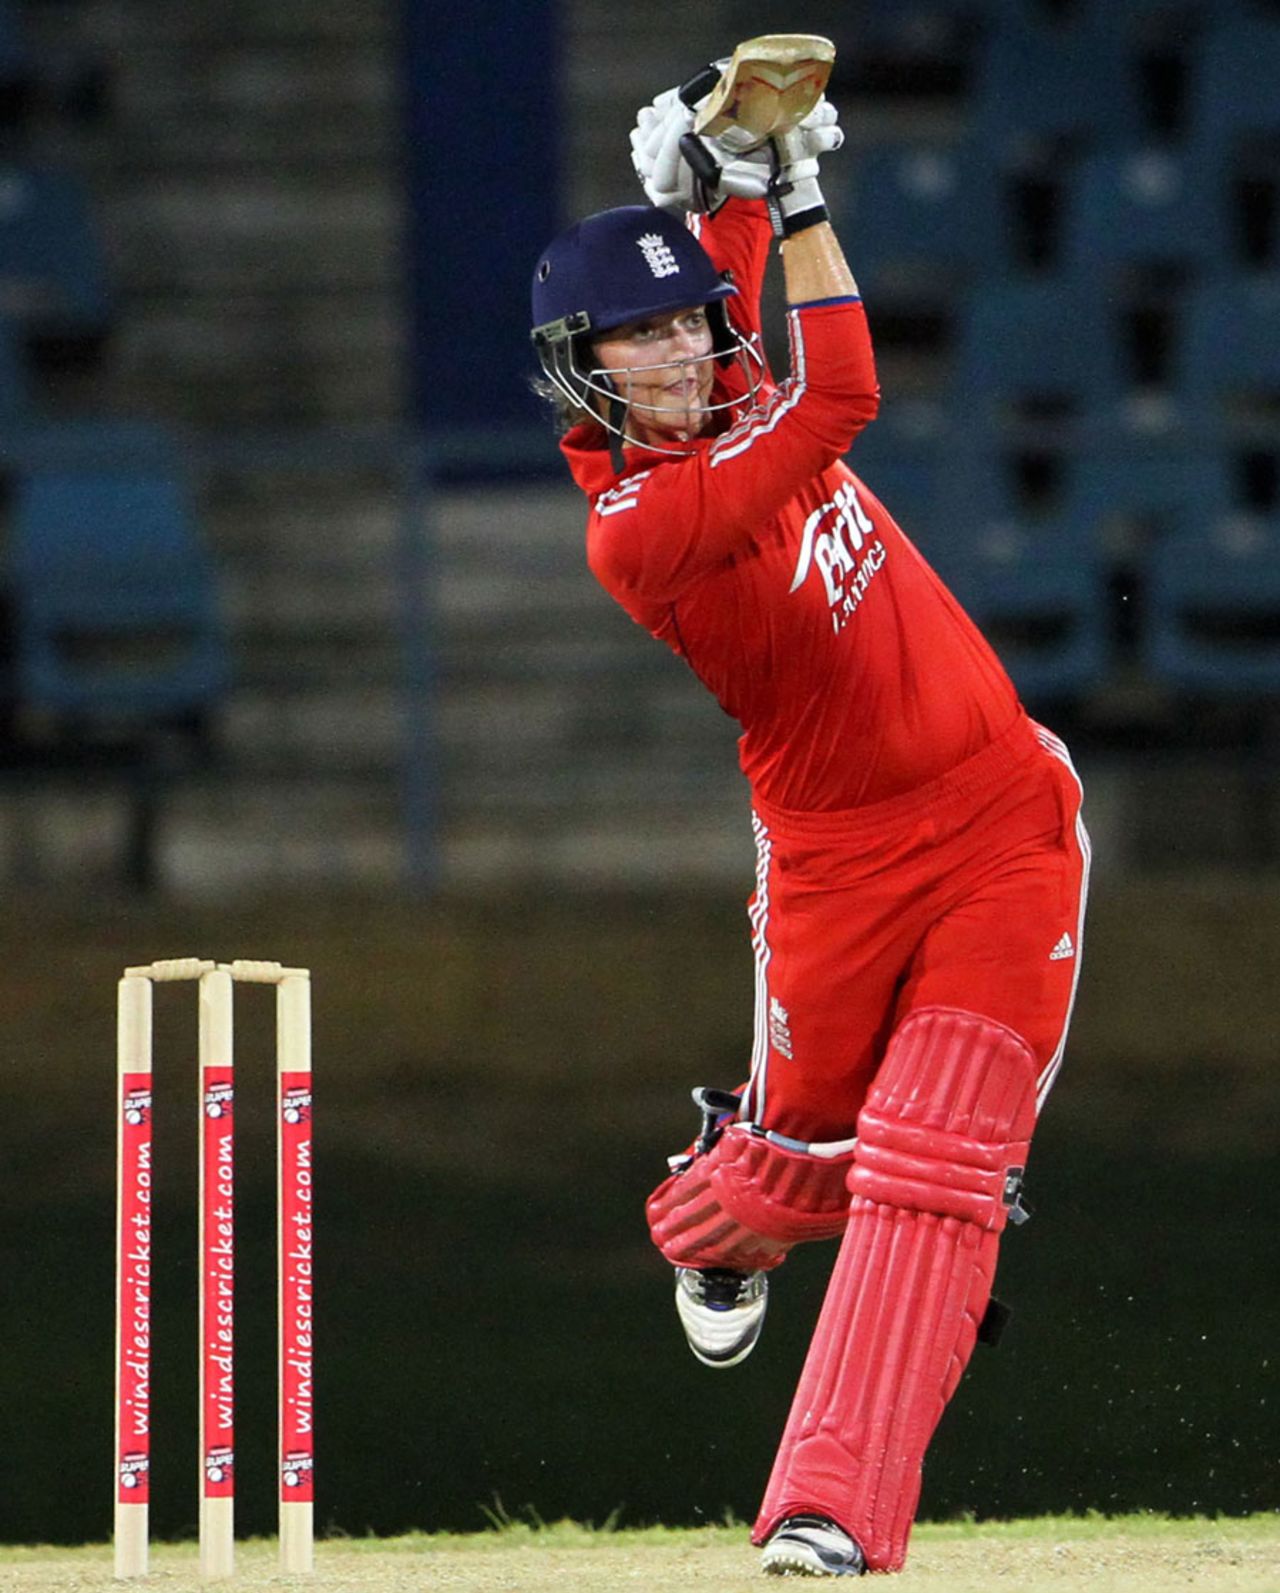 Sarah Taylor lifts over the infield with a Flamingo follow through, West Indies Women v England Women, 3rd ODI, Port of Spain, Trinidad, November 3, 2013